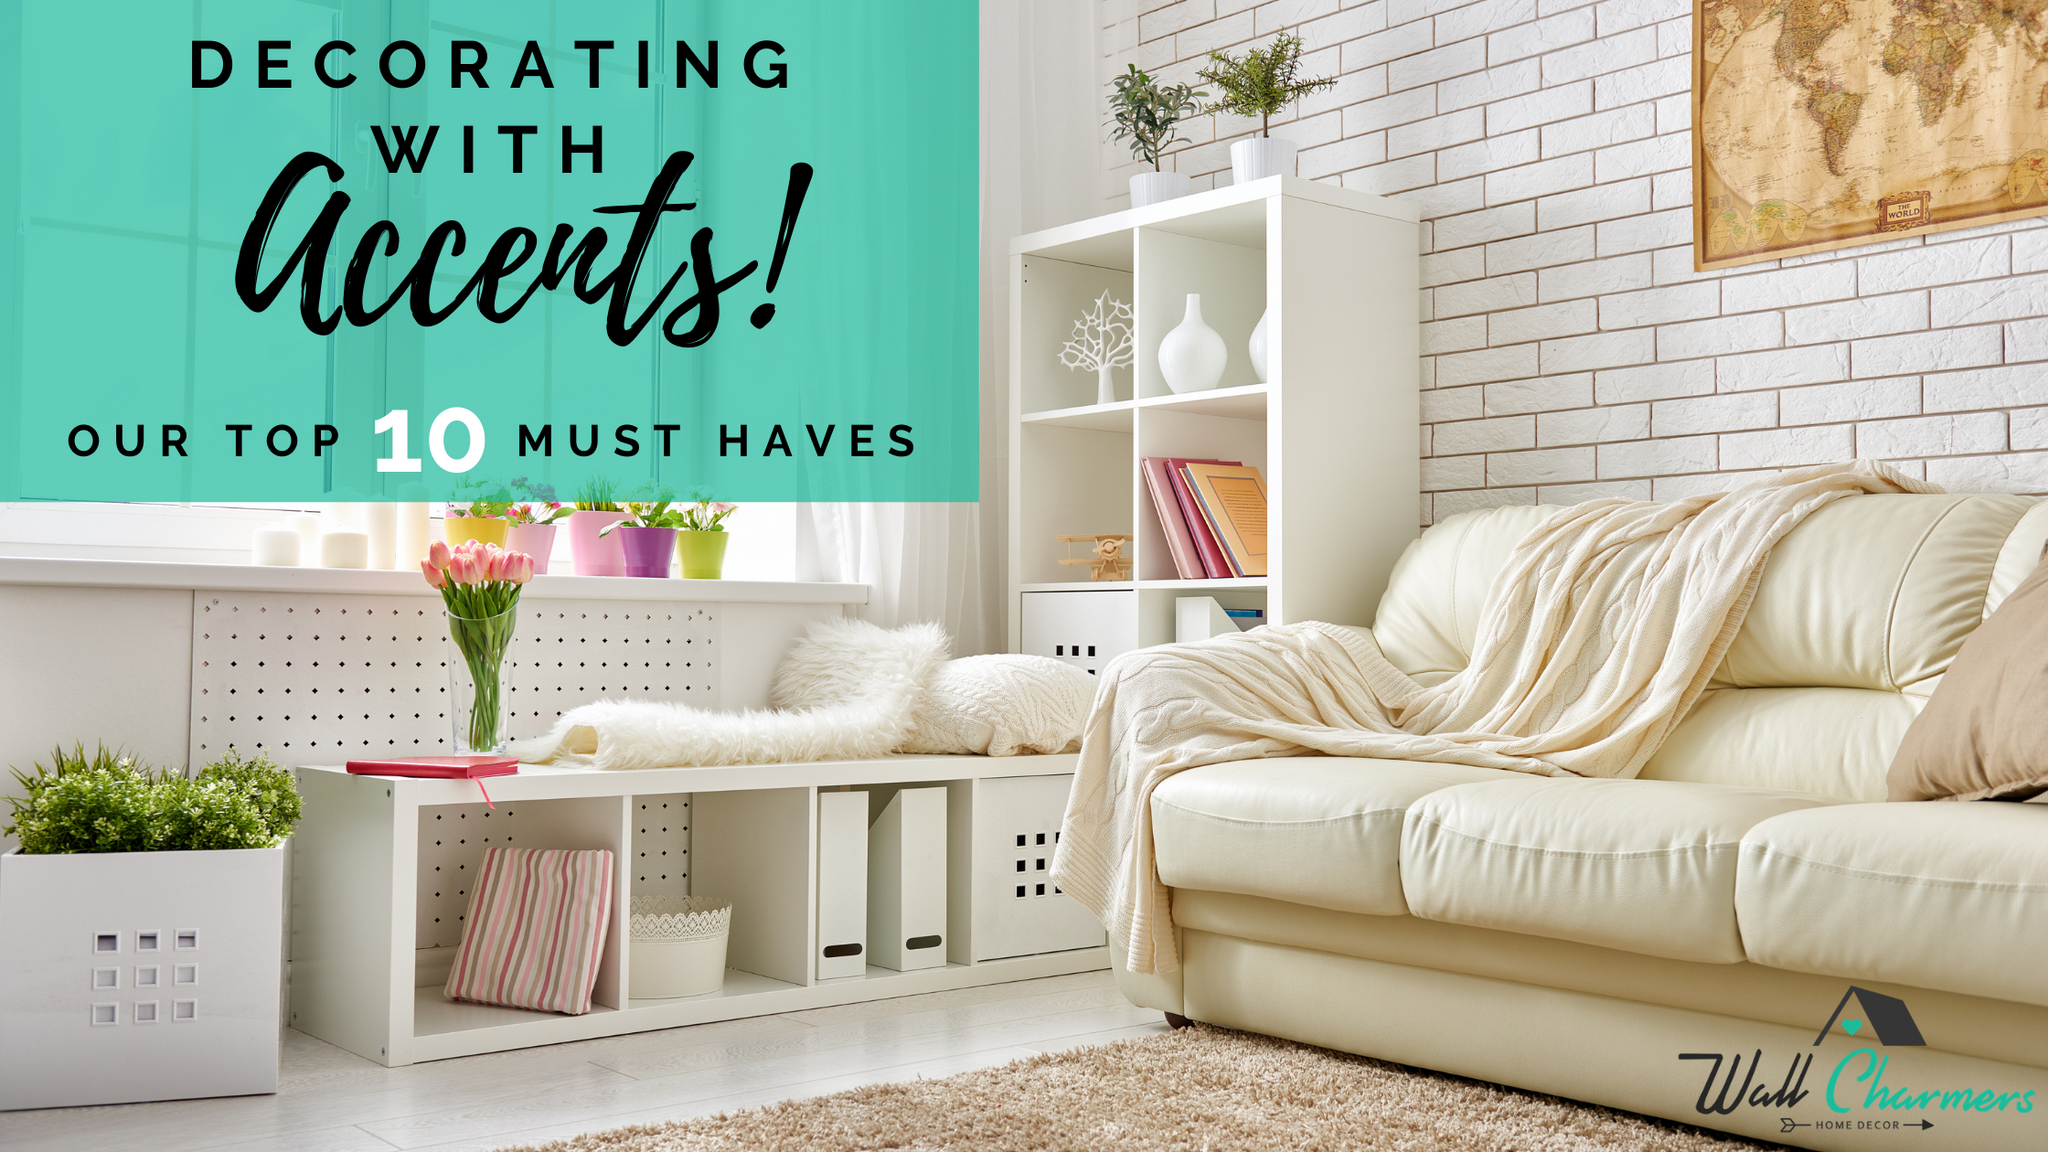 Decorating with Accents - Our Top 10 Must Haves!